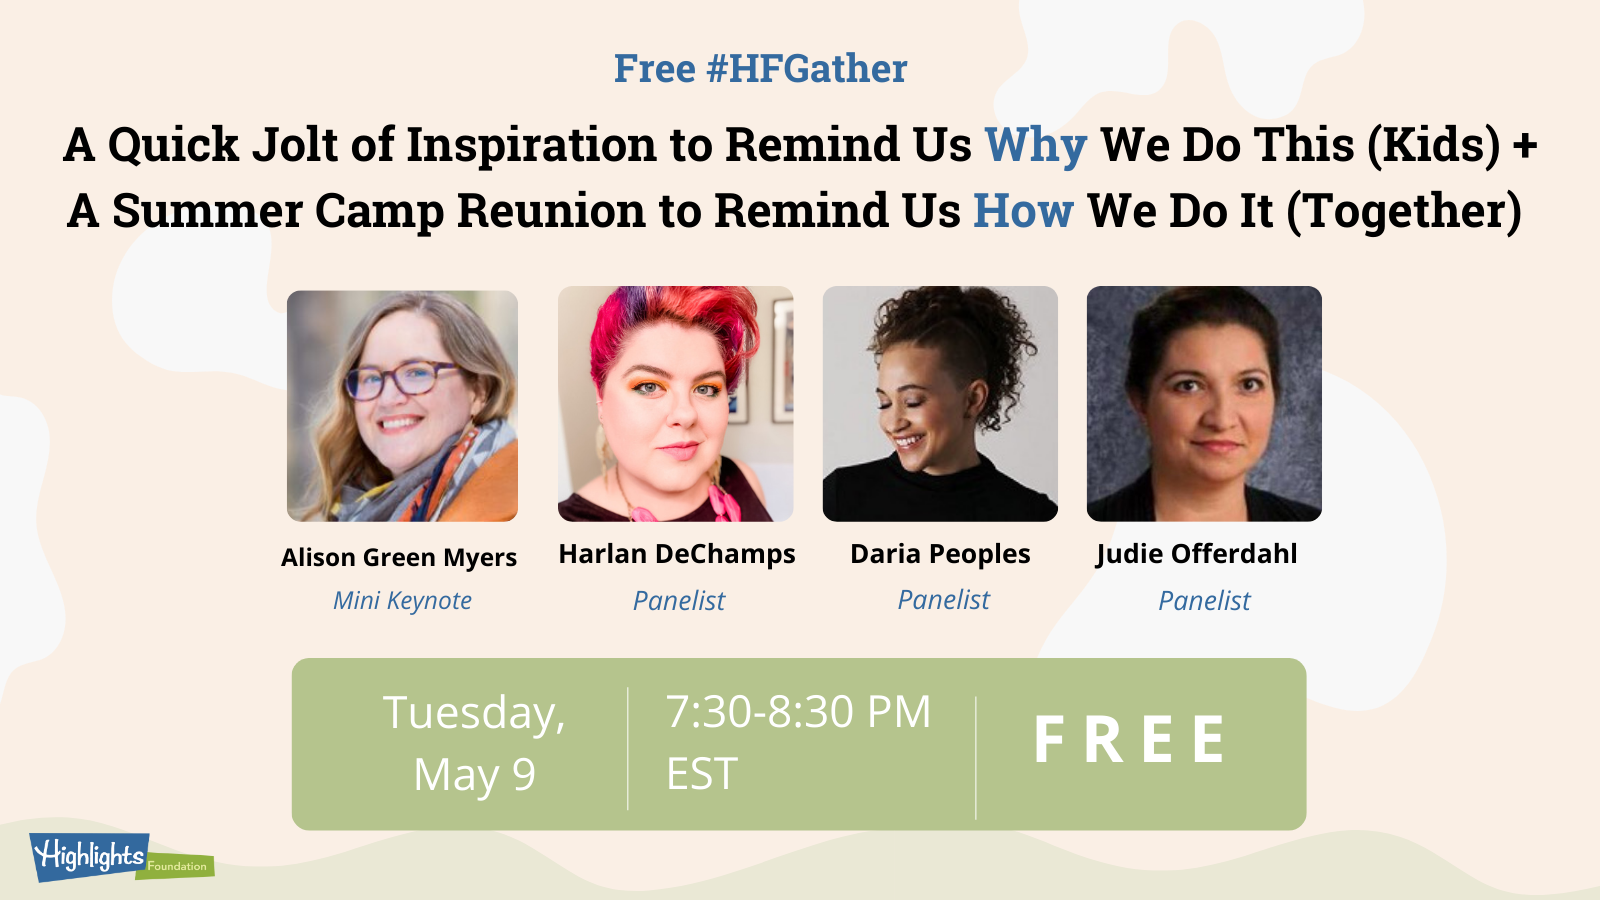 A Quick Jolt of Inspiration to Remind Us Why We Do This (Kids) + a Summer Camp Reunion to Remind Us How We Do It (Together) Mini Inspirational Keynote by Alison Green Myers (with her photo) Panelists: Harlan DeChamps Daria Peoples Judie Offerdahl (with their photos) May 9, 7:30 EST